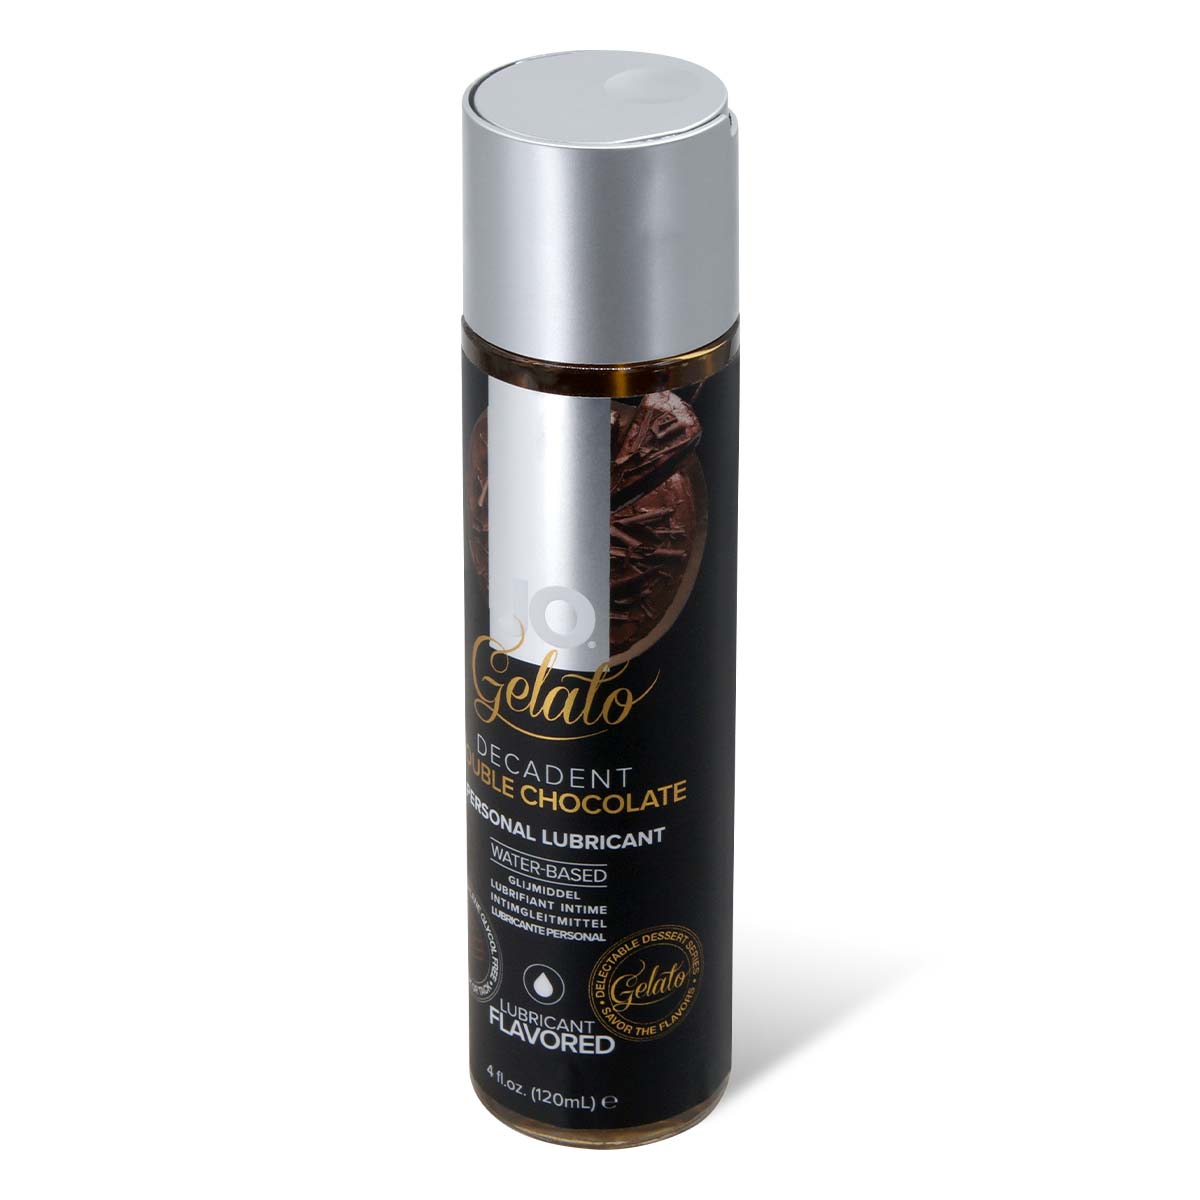 System Jo JO Gelato Decadent Double Chocolate 120ml water-based lubricant-p_1